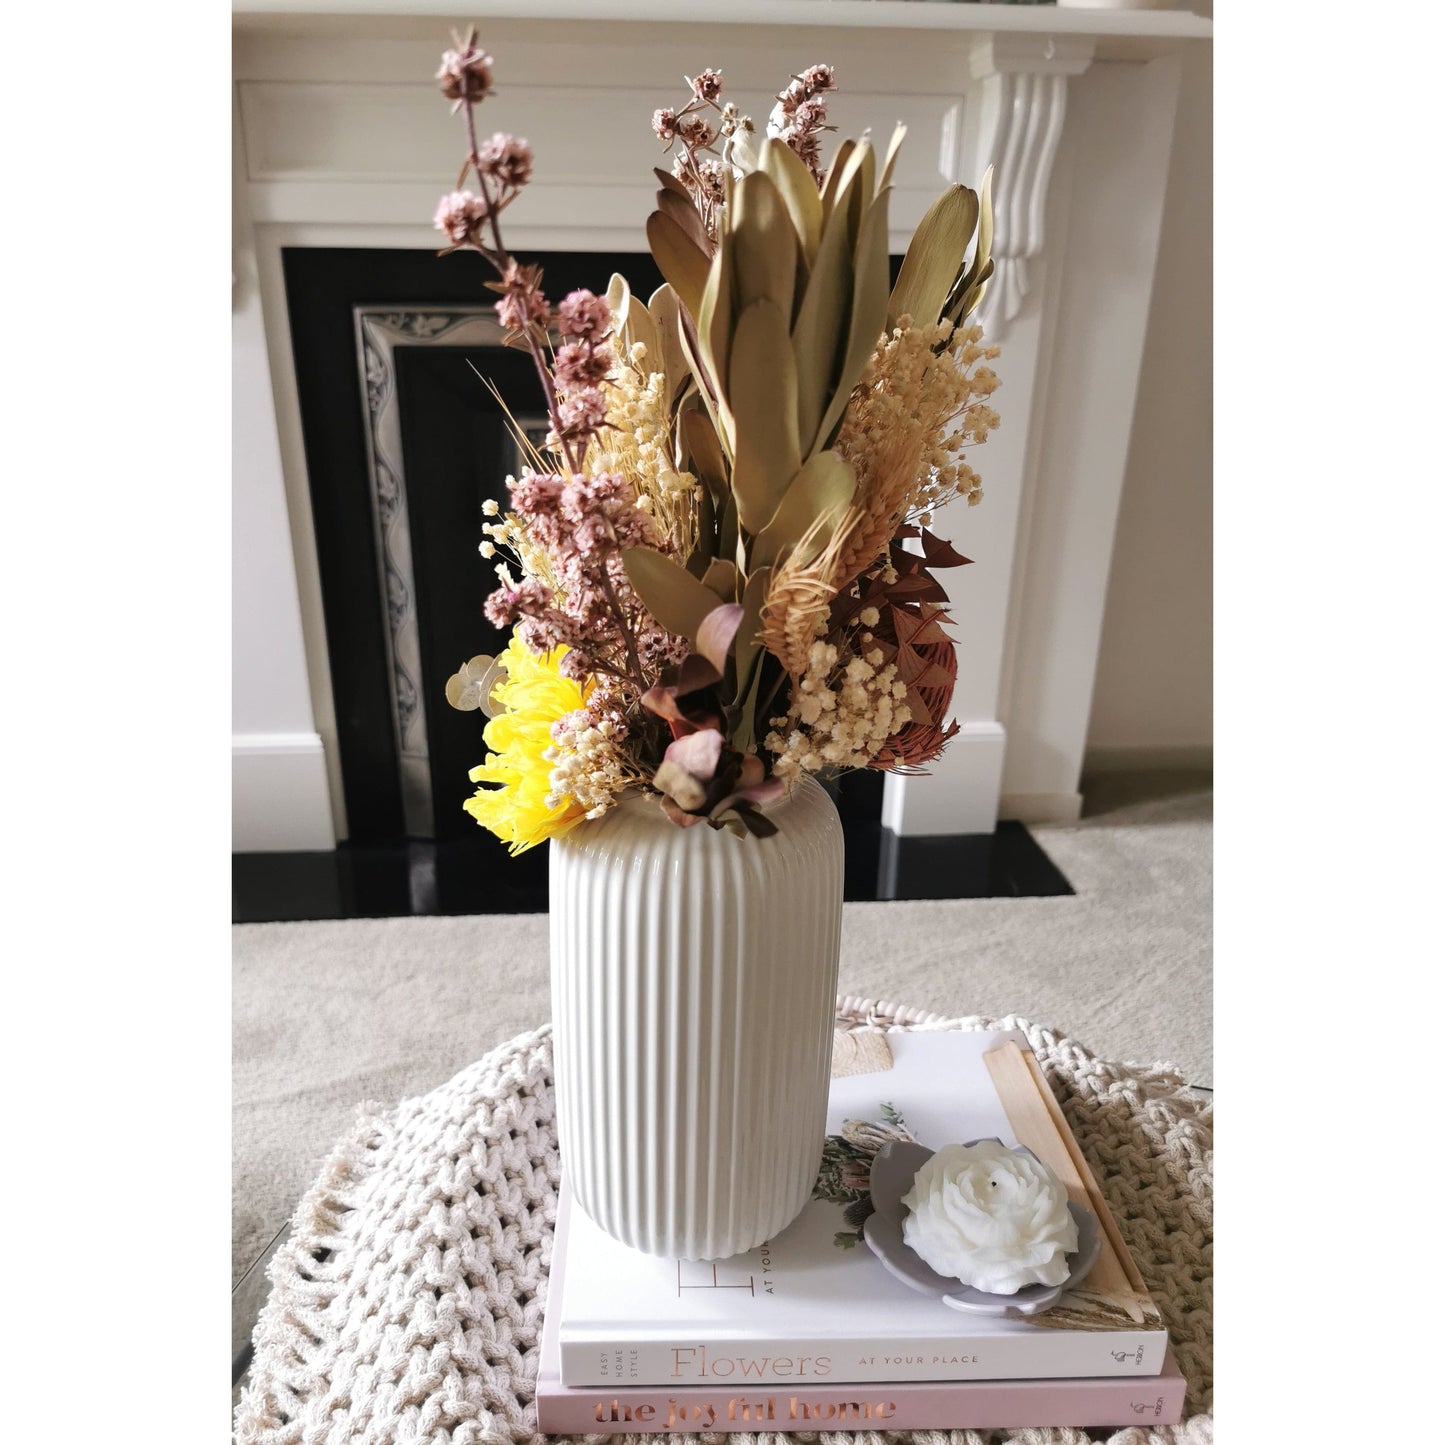 Native dried and preserved flowers with a preserved sunflower in tall white ribbed gloss vase